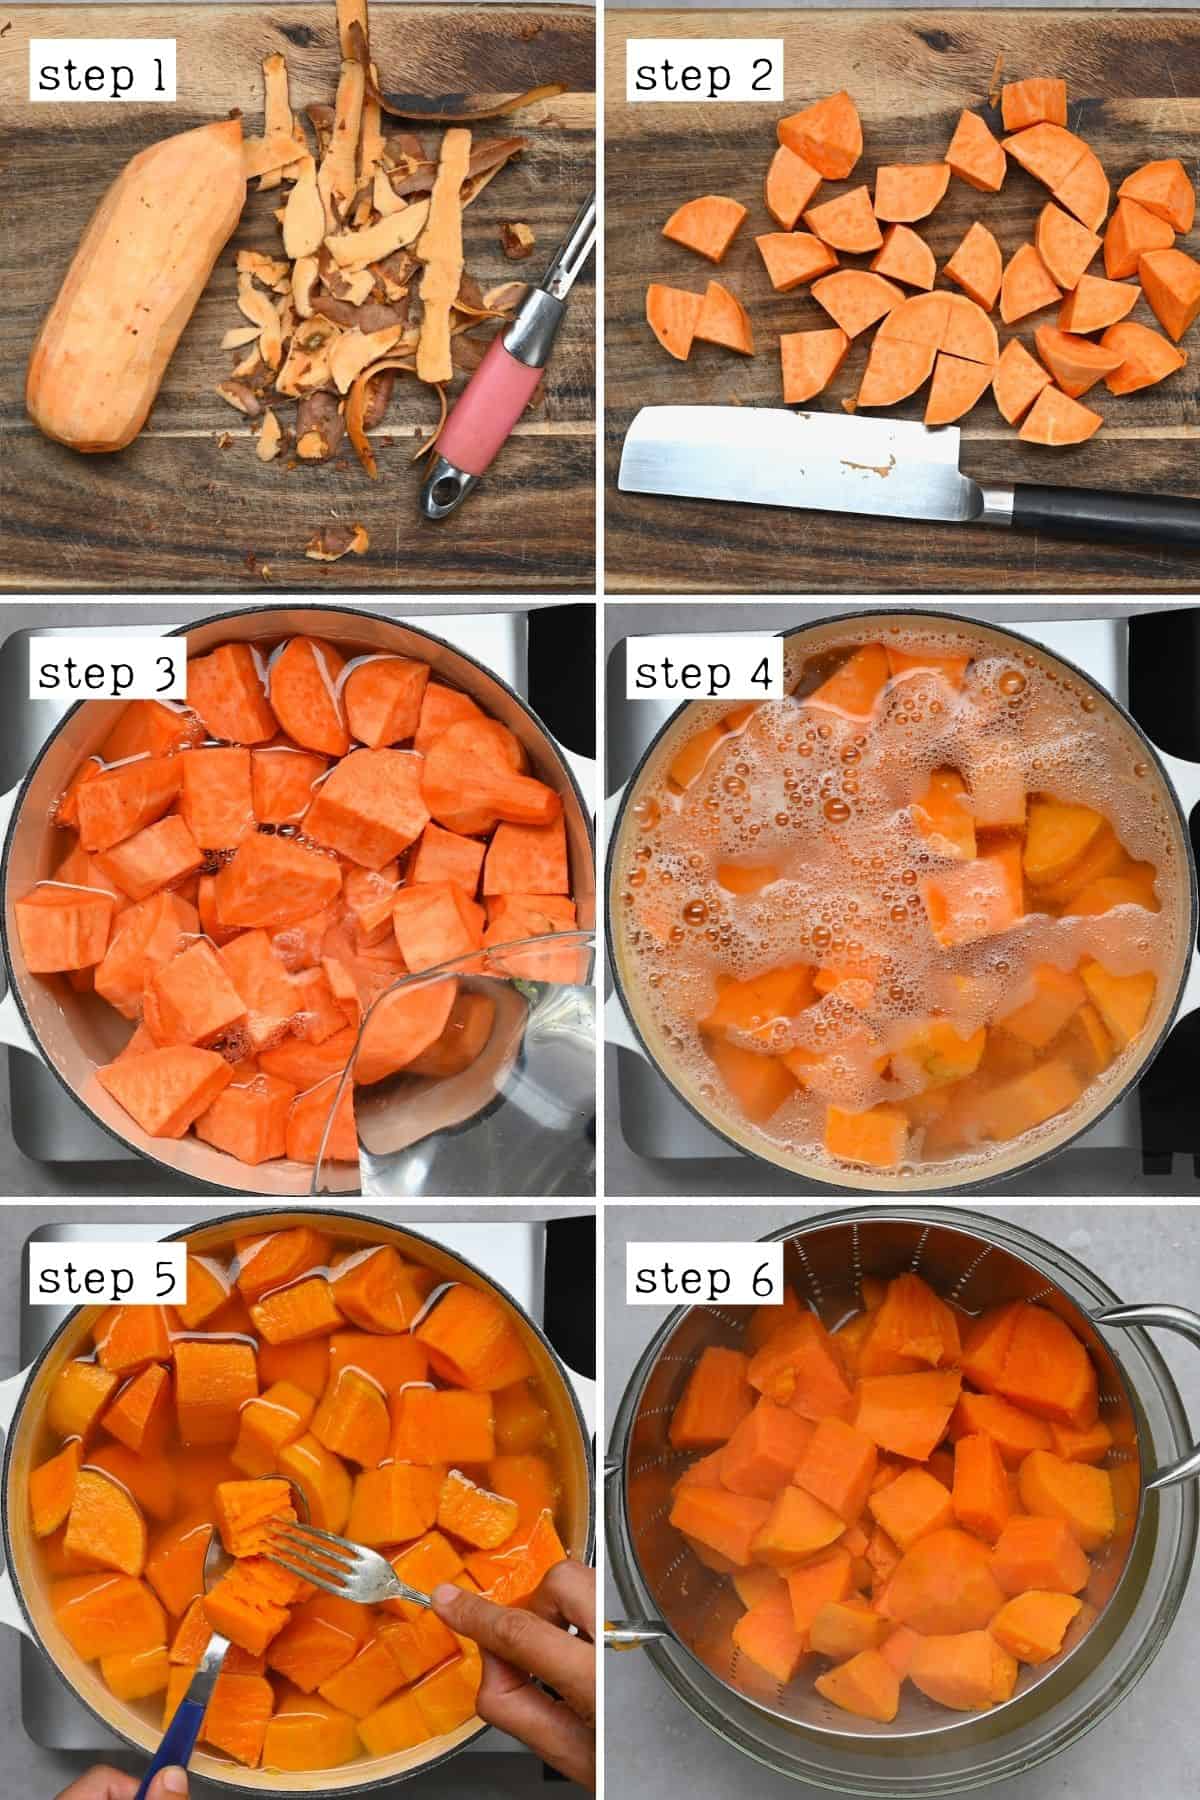 Steps for preparing and cooking sweet potato